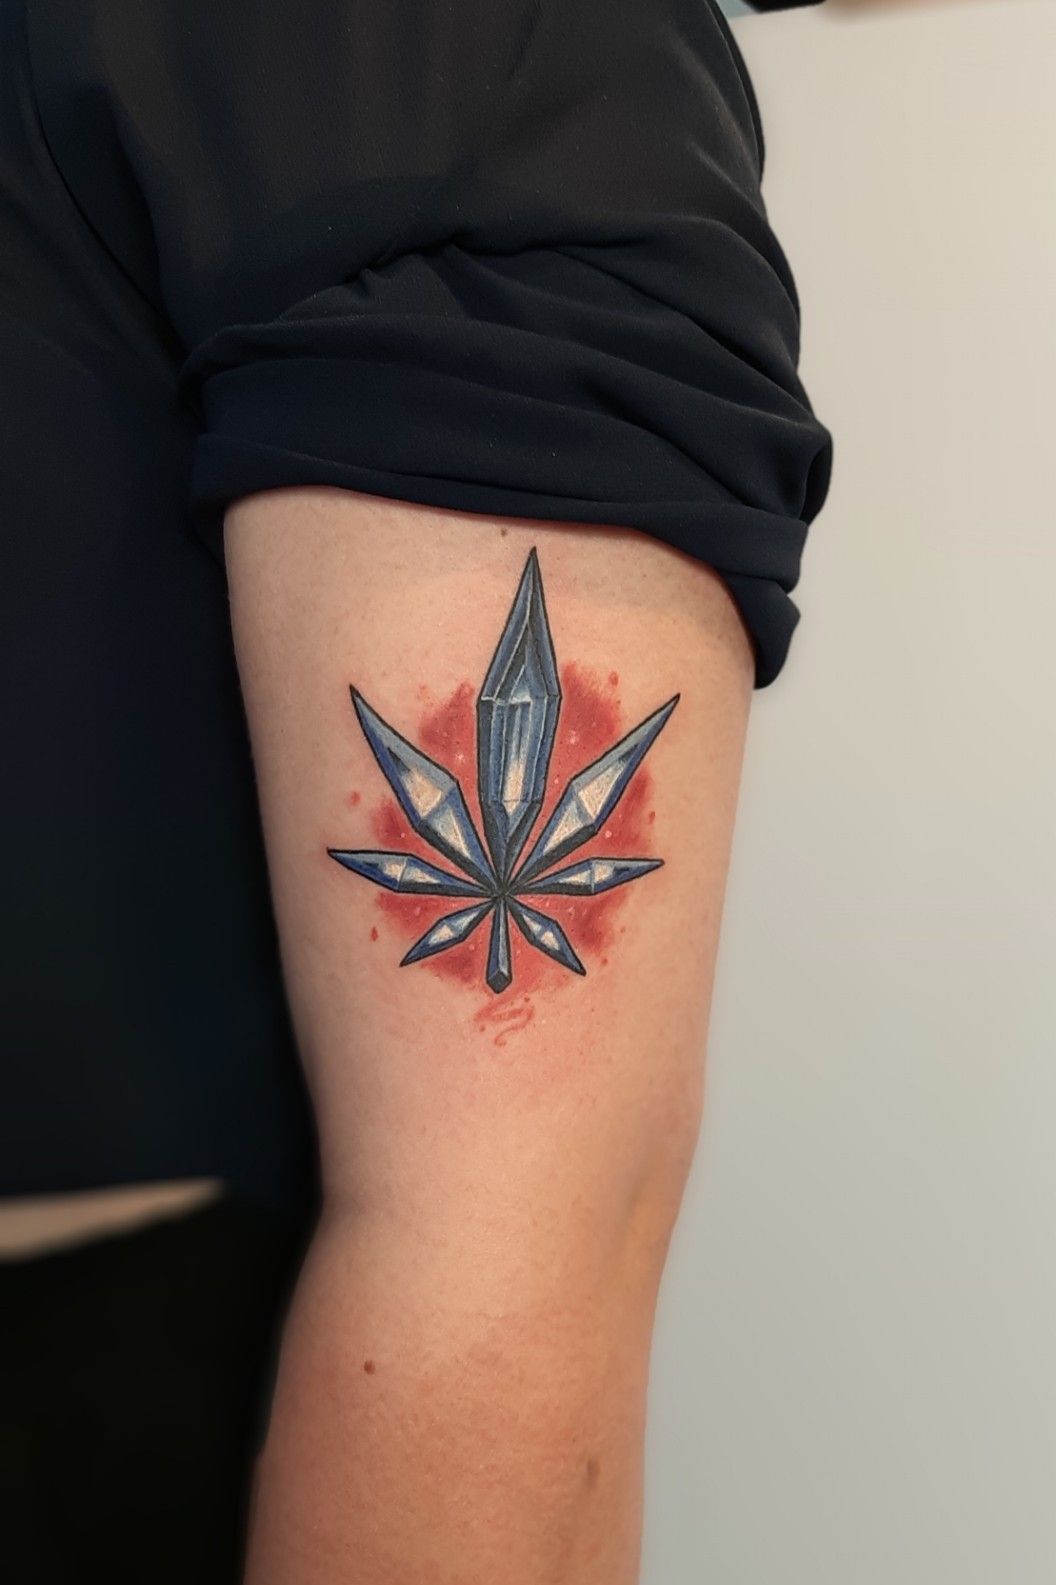 25 Lovely Leaf Tattoo Designs to Try | Tattoo designs and meanings, Tattoos,  Book tattoo